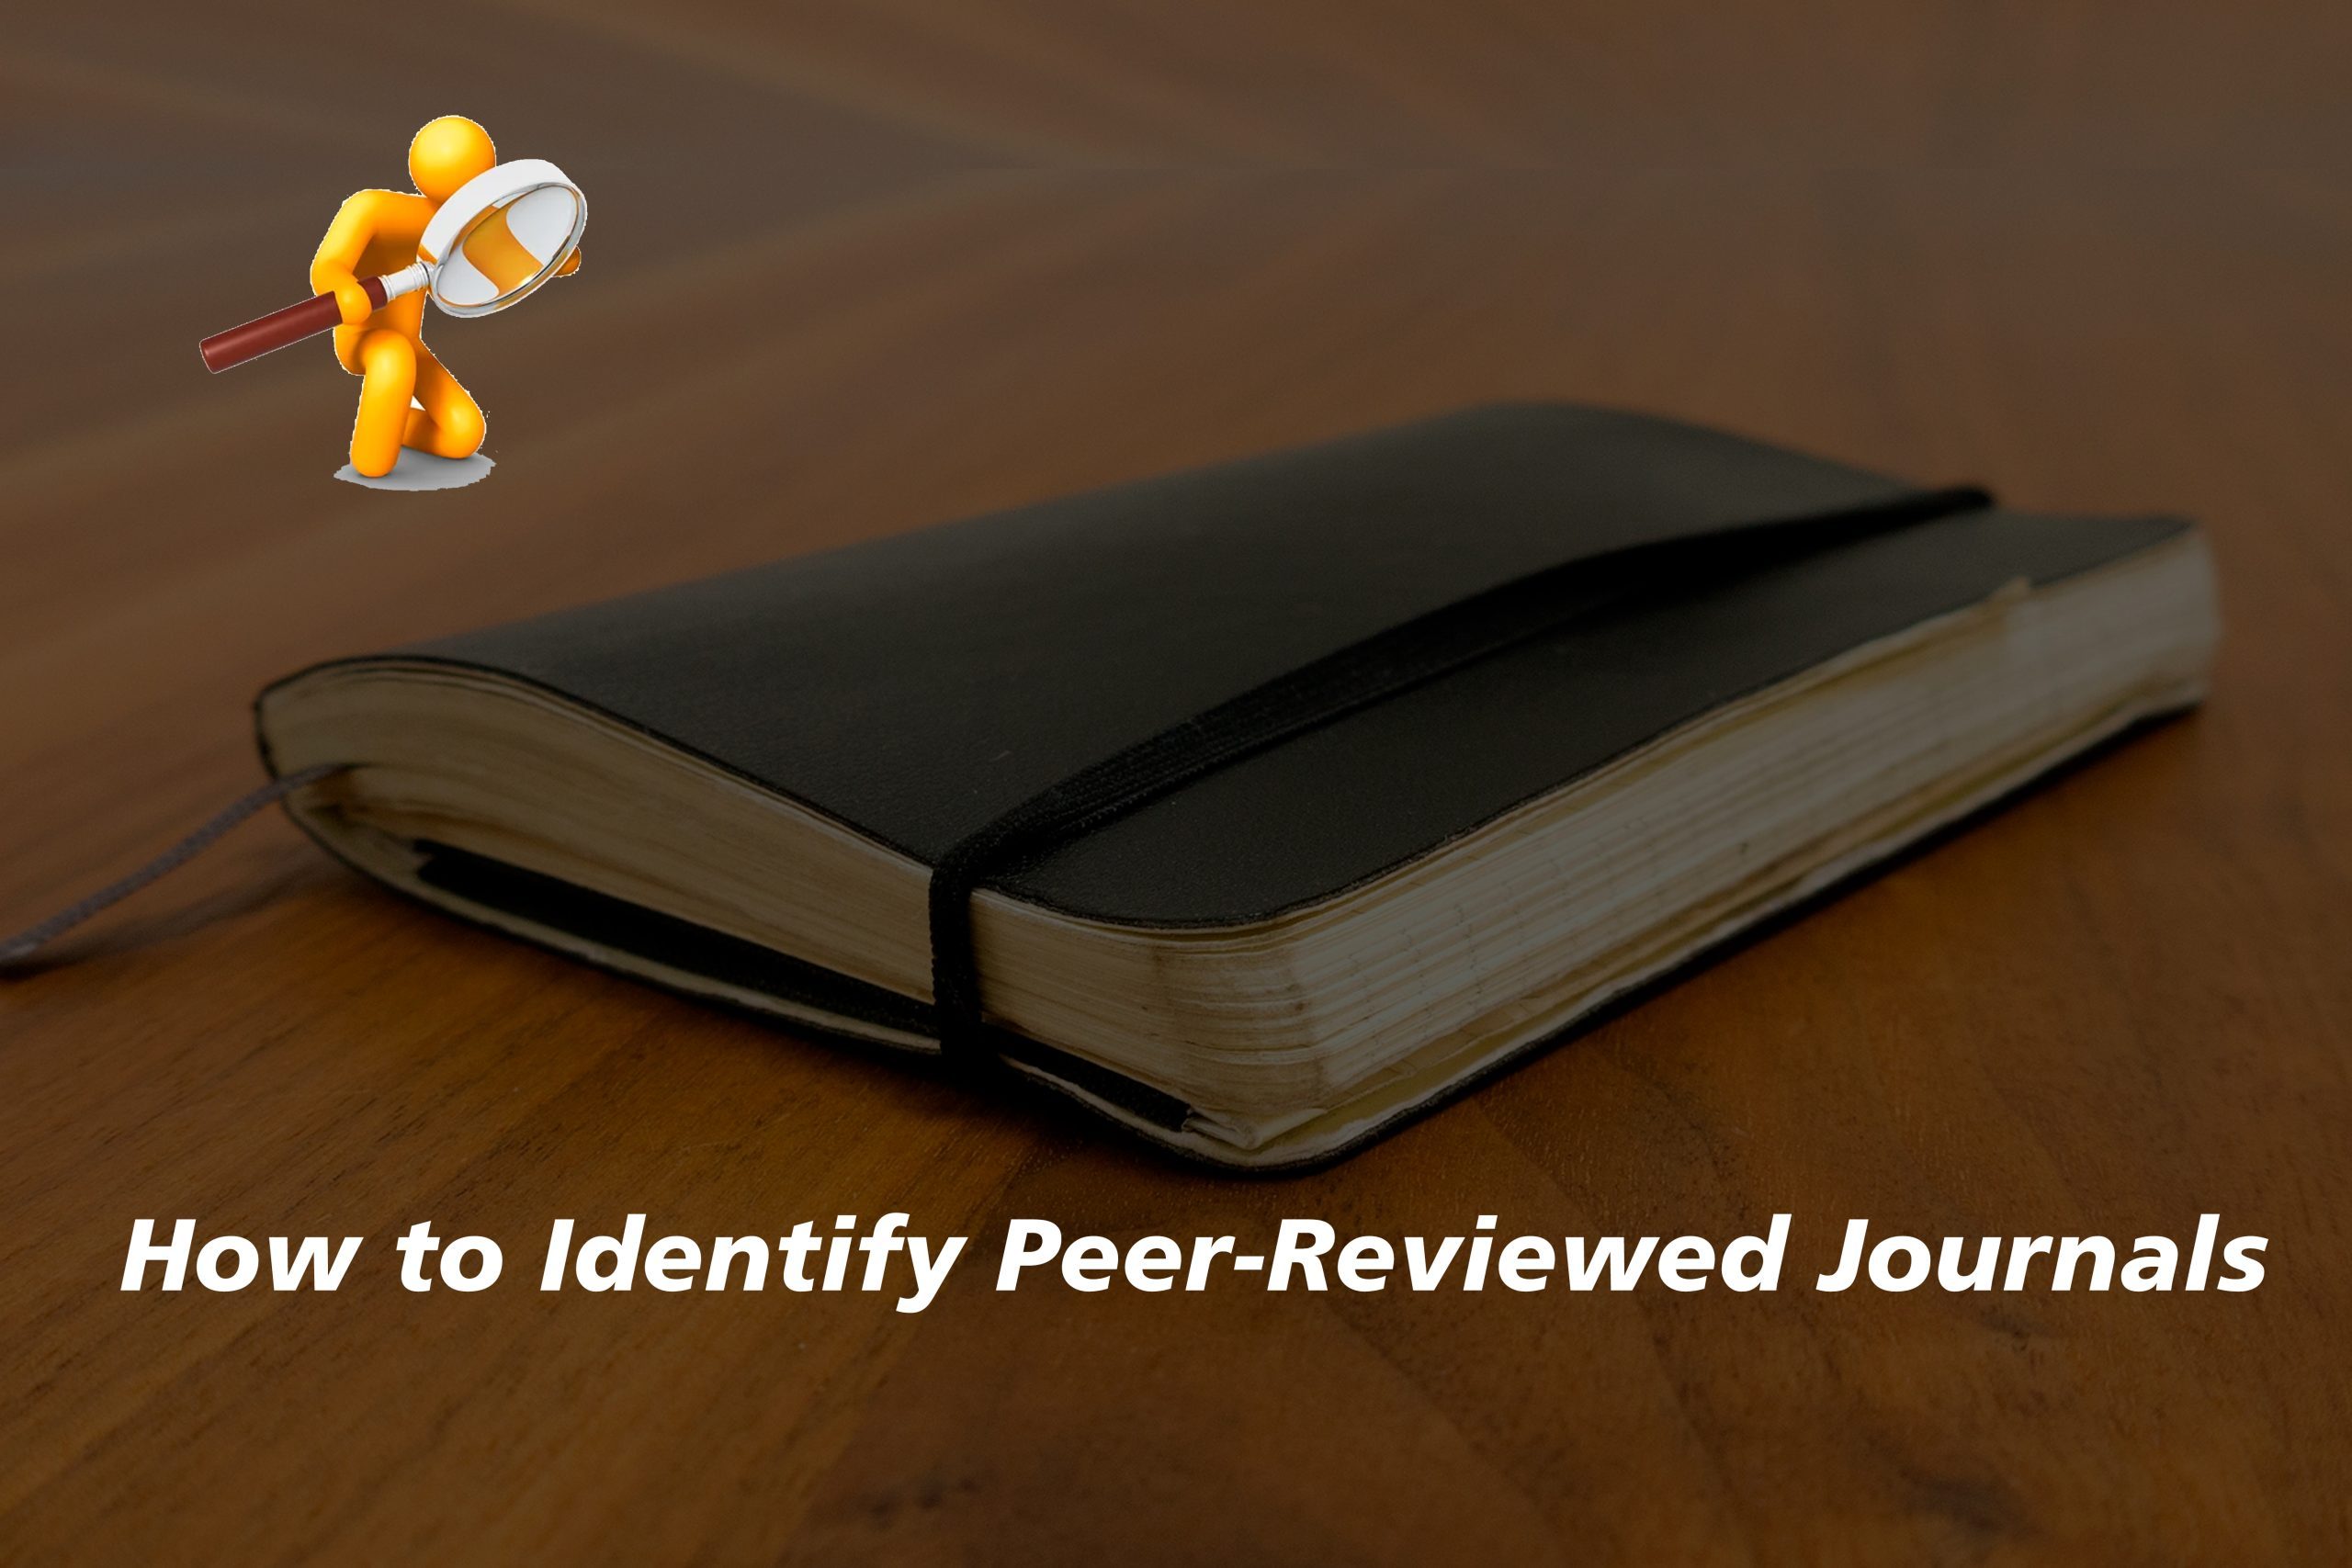 How to Identify Peer-Reviewed Journals